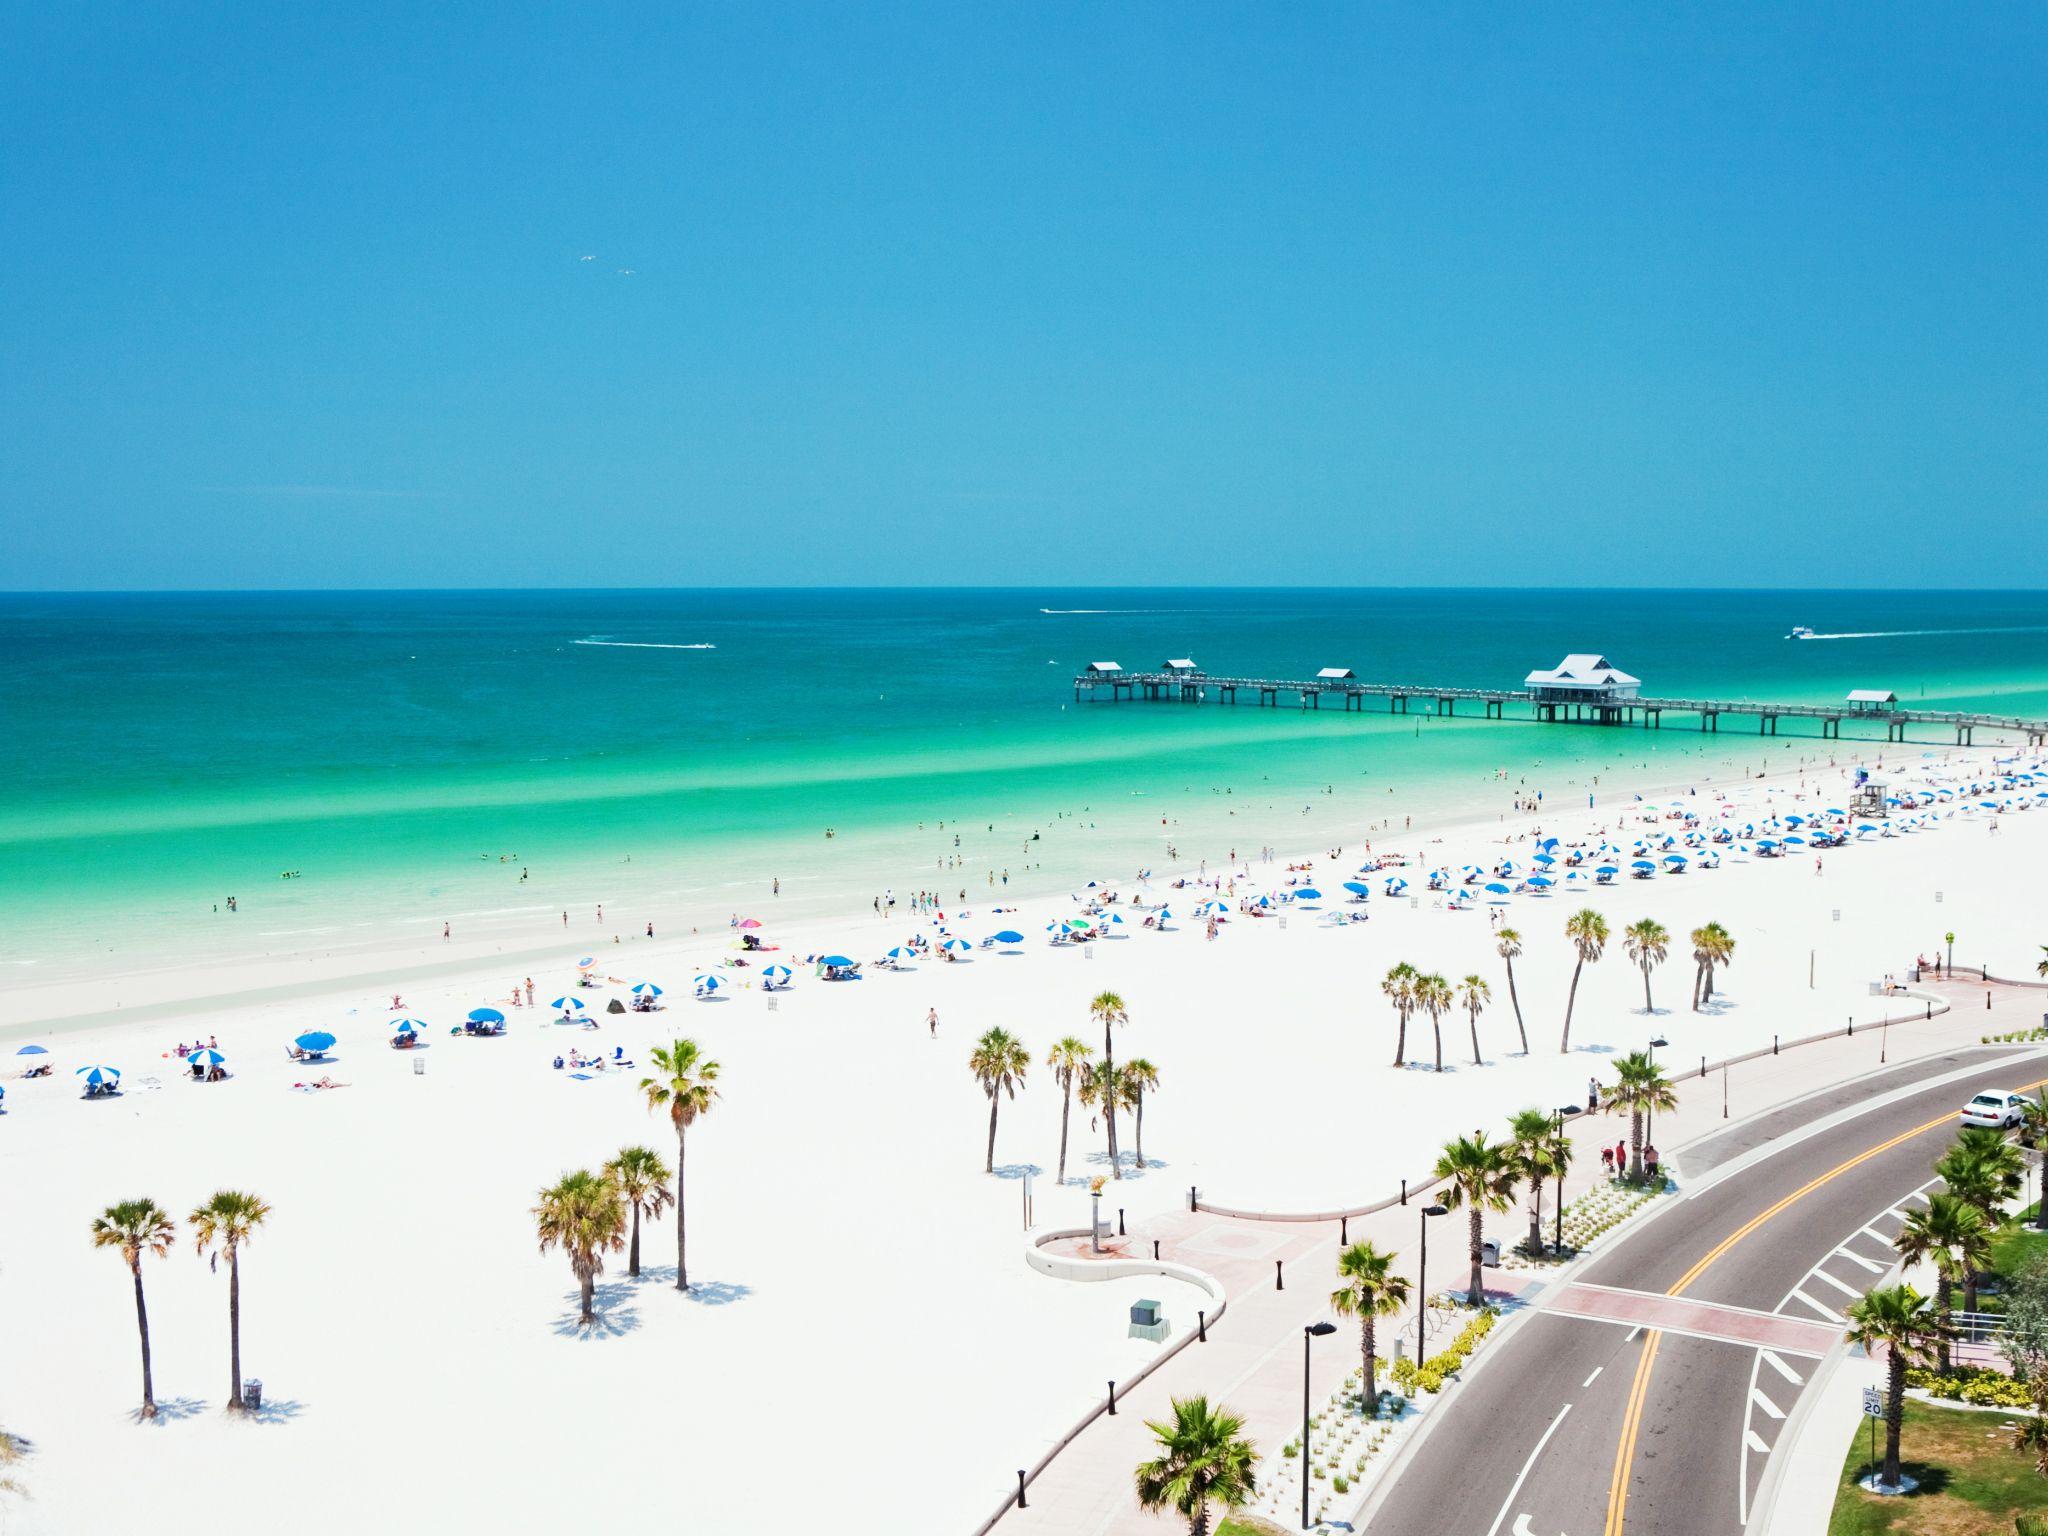 Clearwater Beach Wallpapers - Top Free Clearwater Beach Backgrounds ...